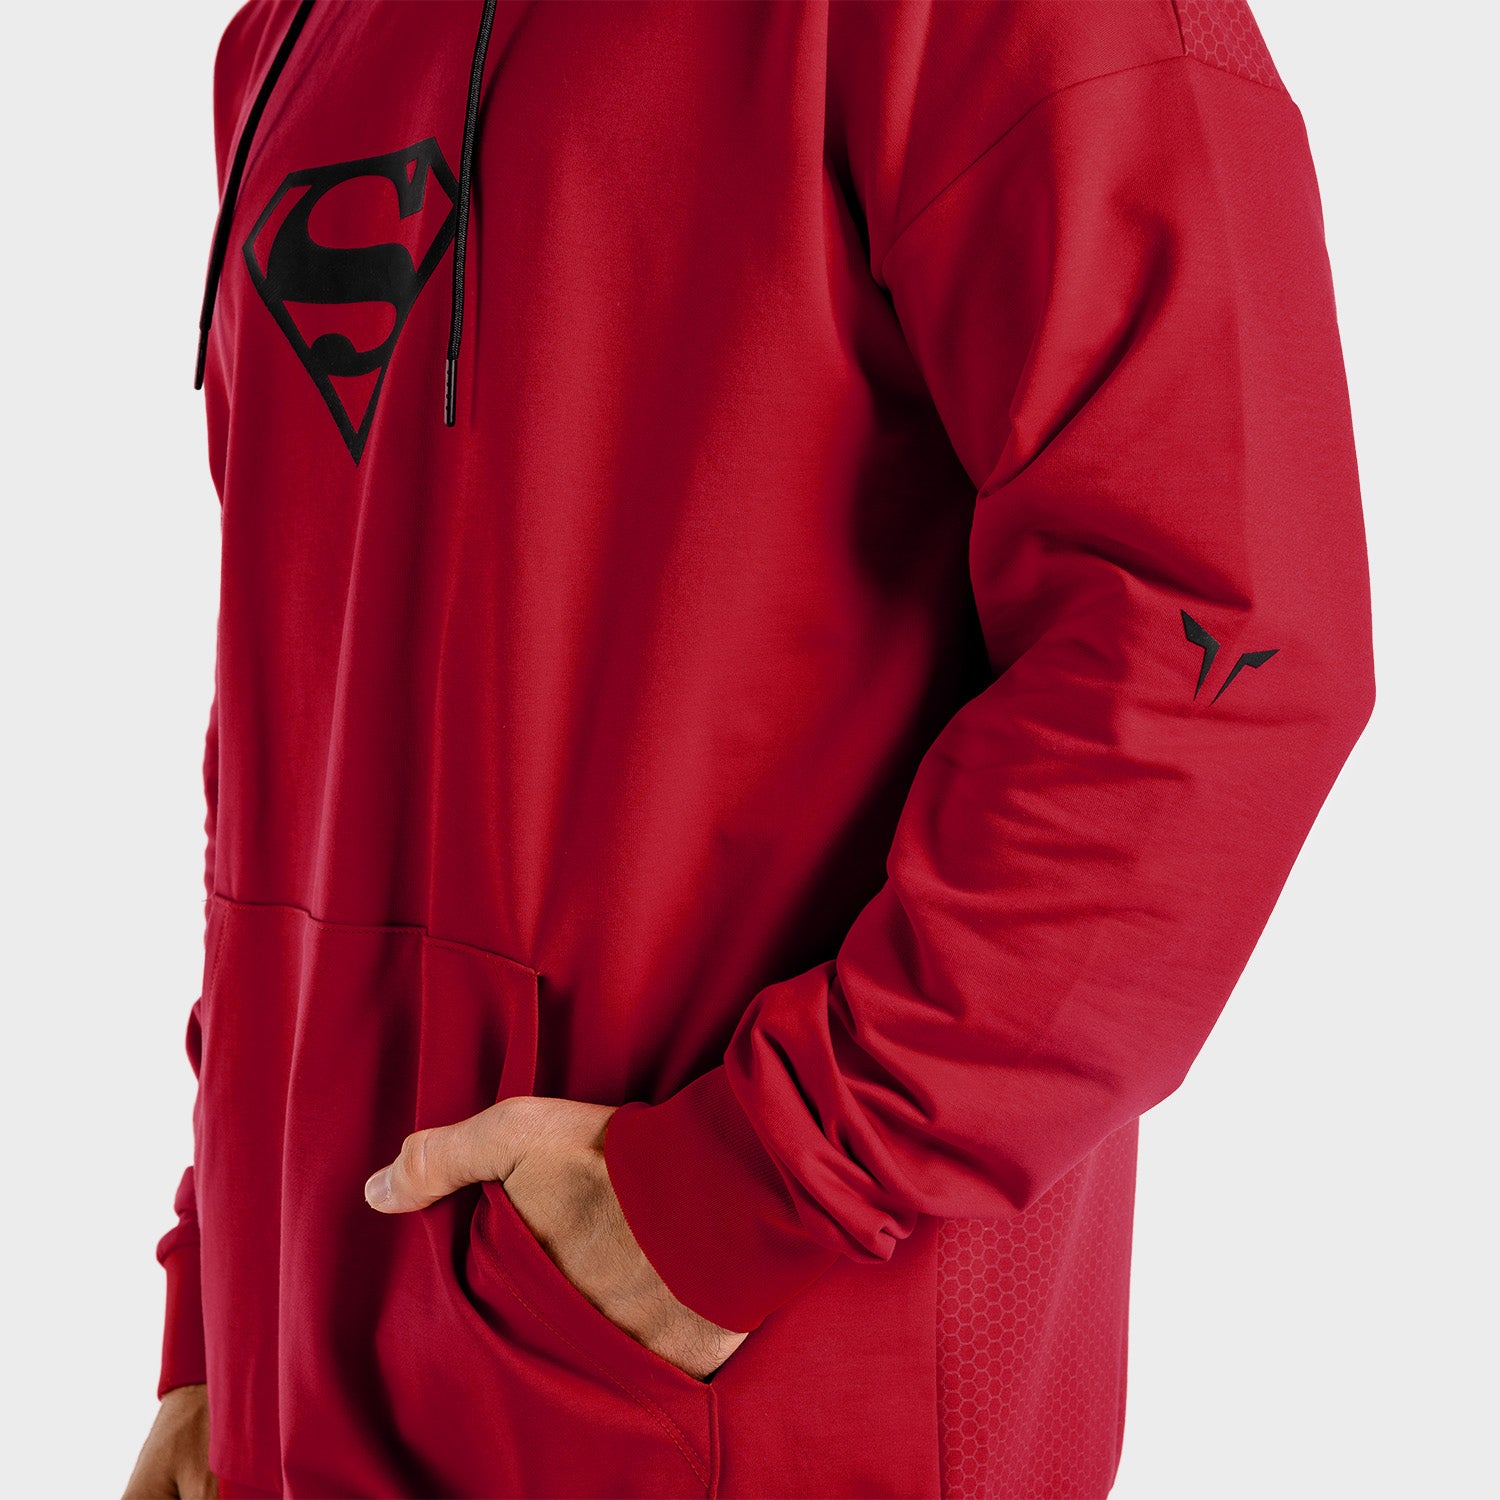 squatwolf-workout-hoodies-for-men-superman-gym-hoodie-red-gym-wear